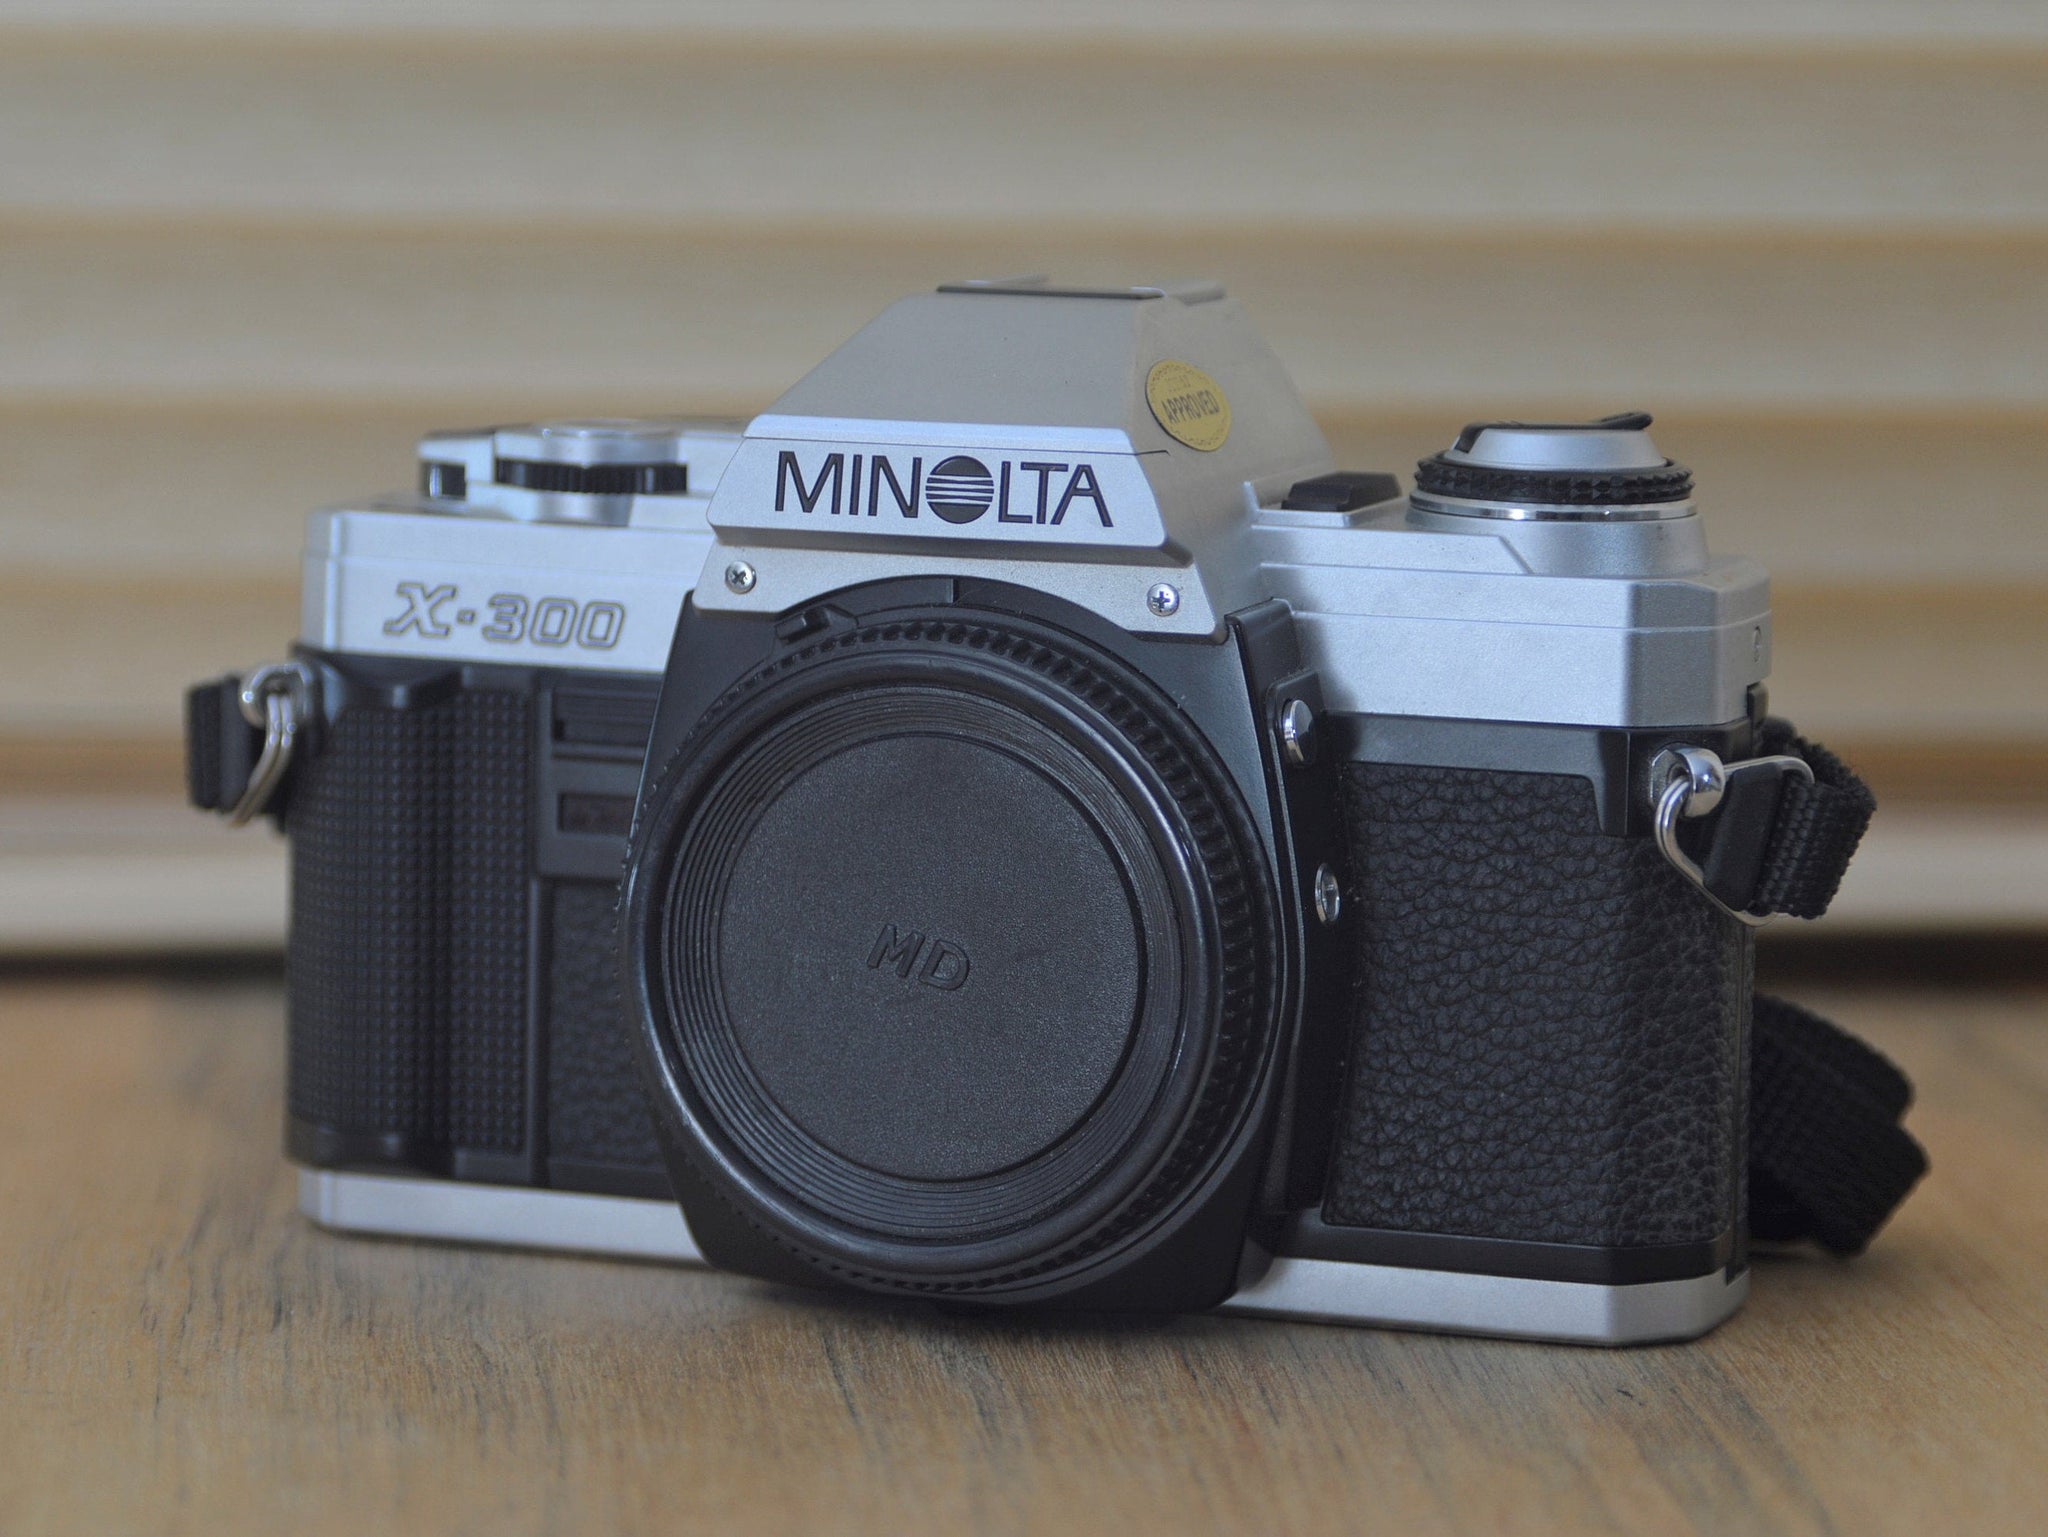 Lovely Minolta X-300 body only. A great 35mm SLR. Lovely addition to any level of photographer's kit. - RewindCameras quality vintage cameras, fully tested and serviced